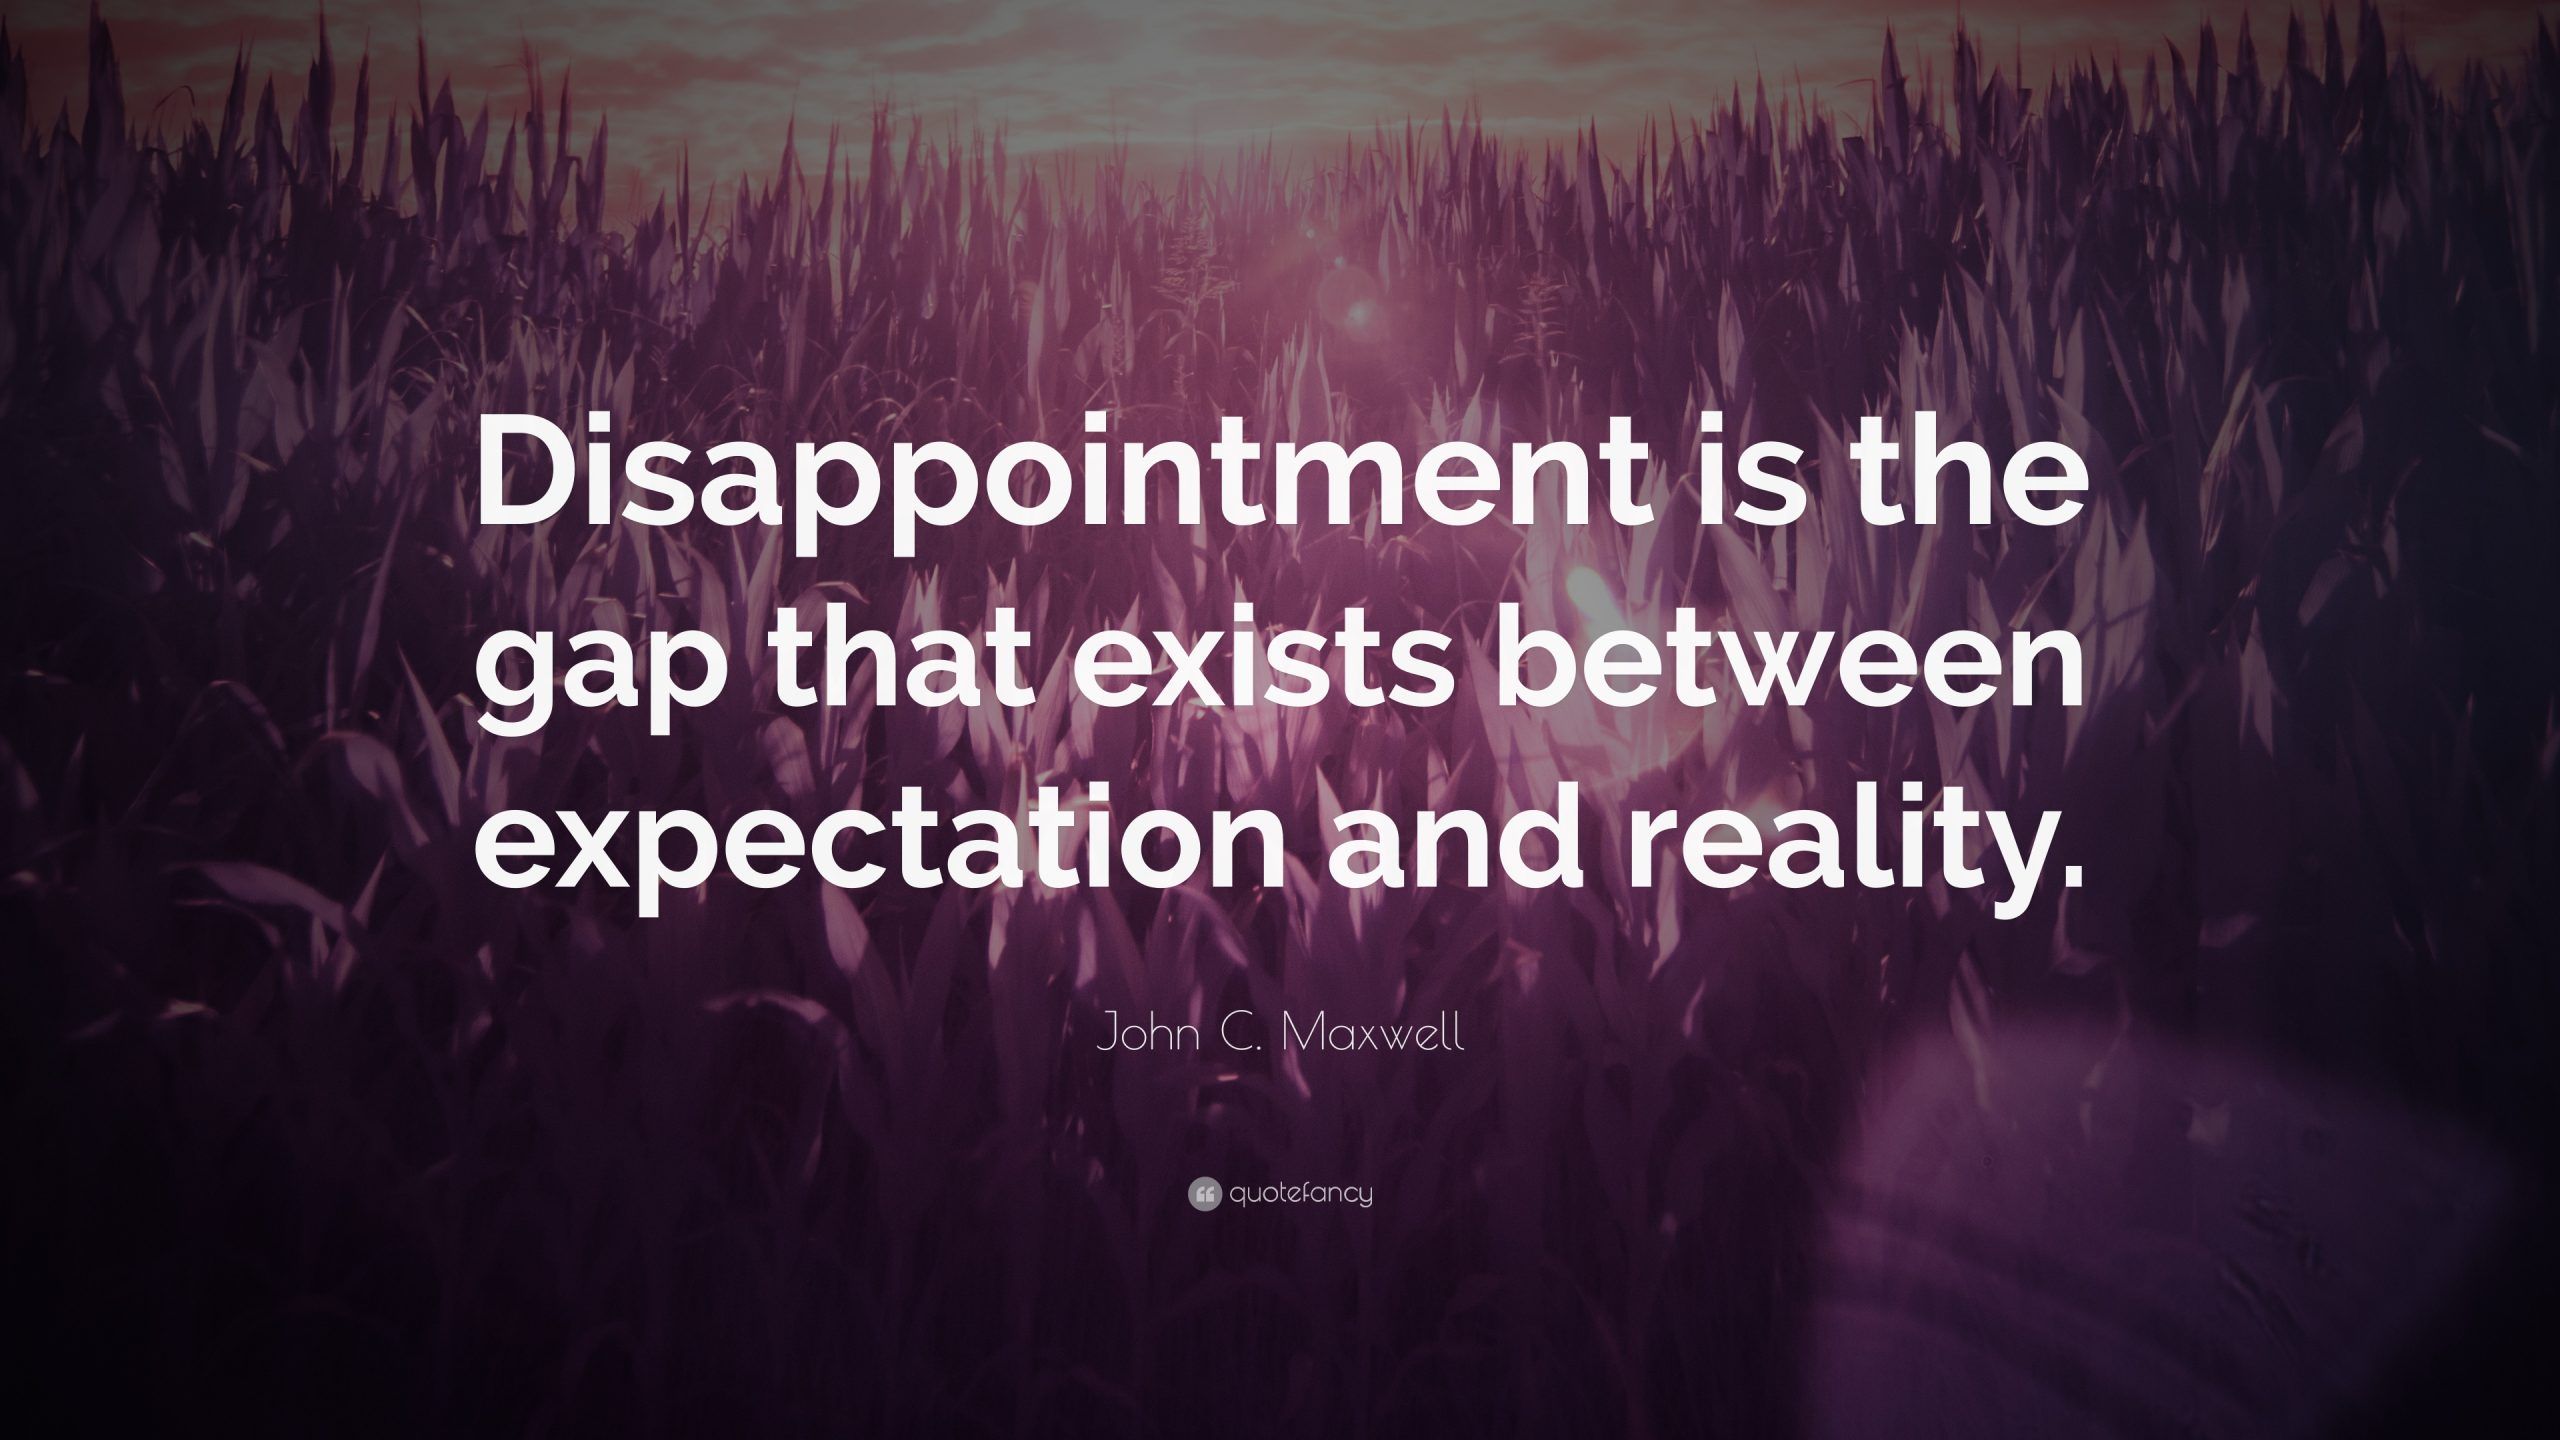 John Maxwell Quote E2809cdisappointment Is The Gap That Exists Between Expectation And Reality Wallpaper Quotefancy Quotes Disappointmentynonym Dictionary